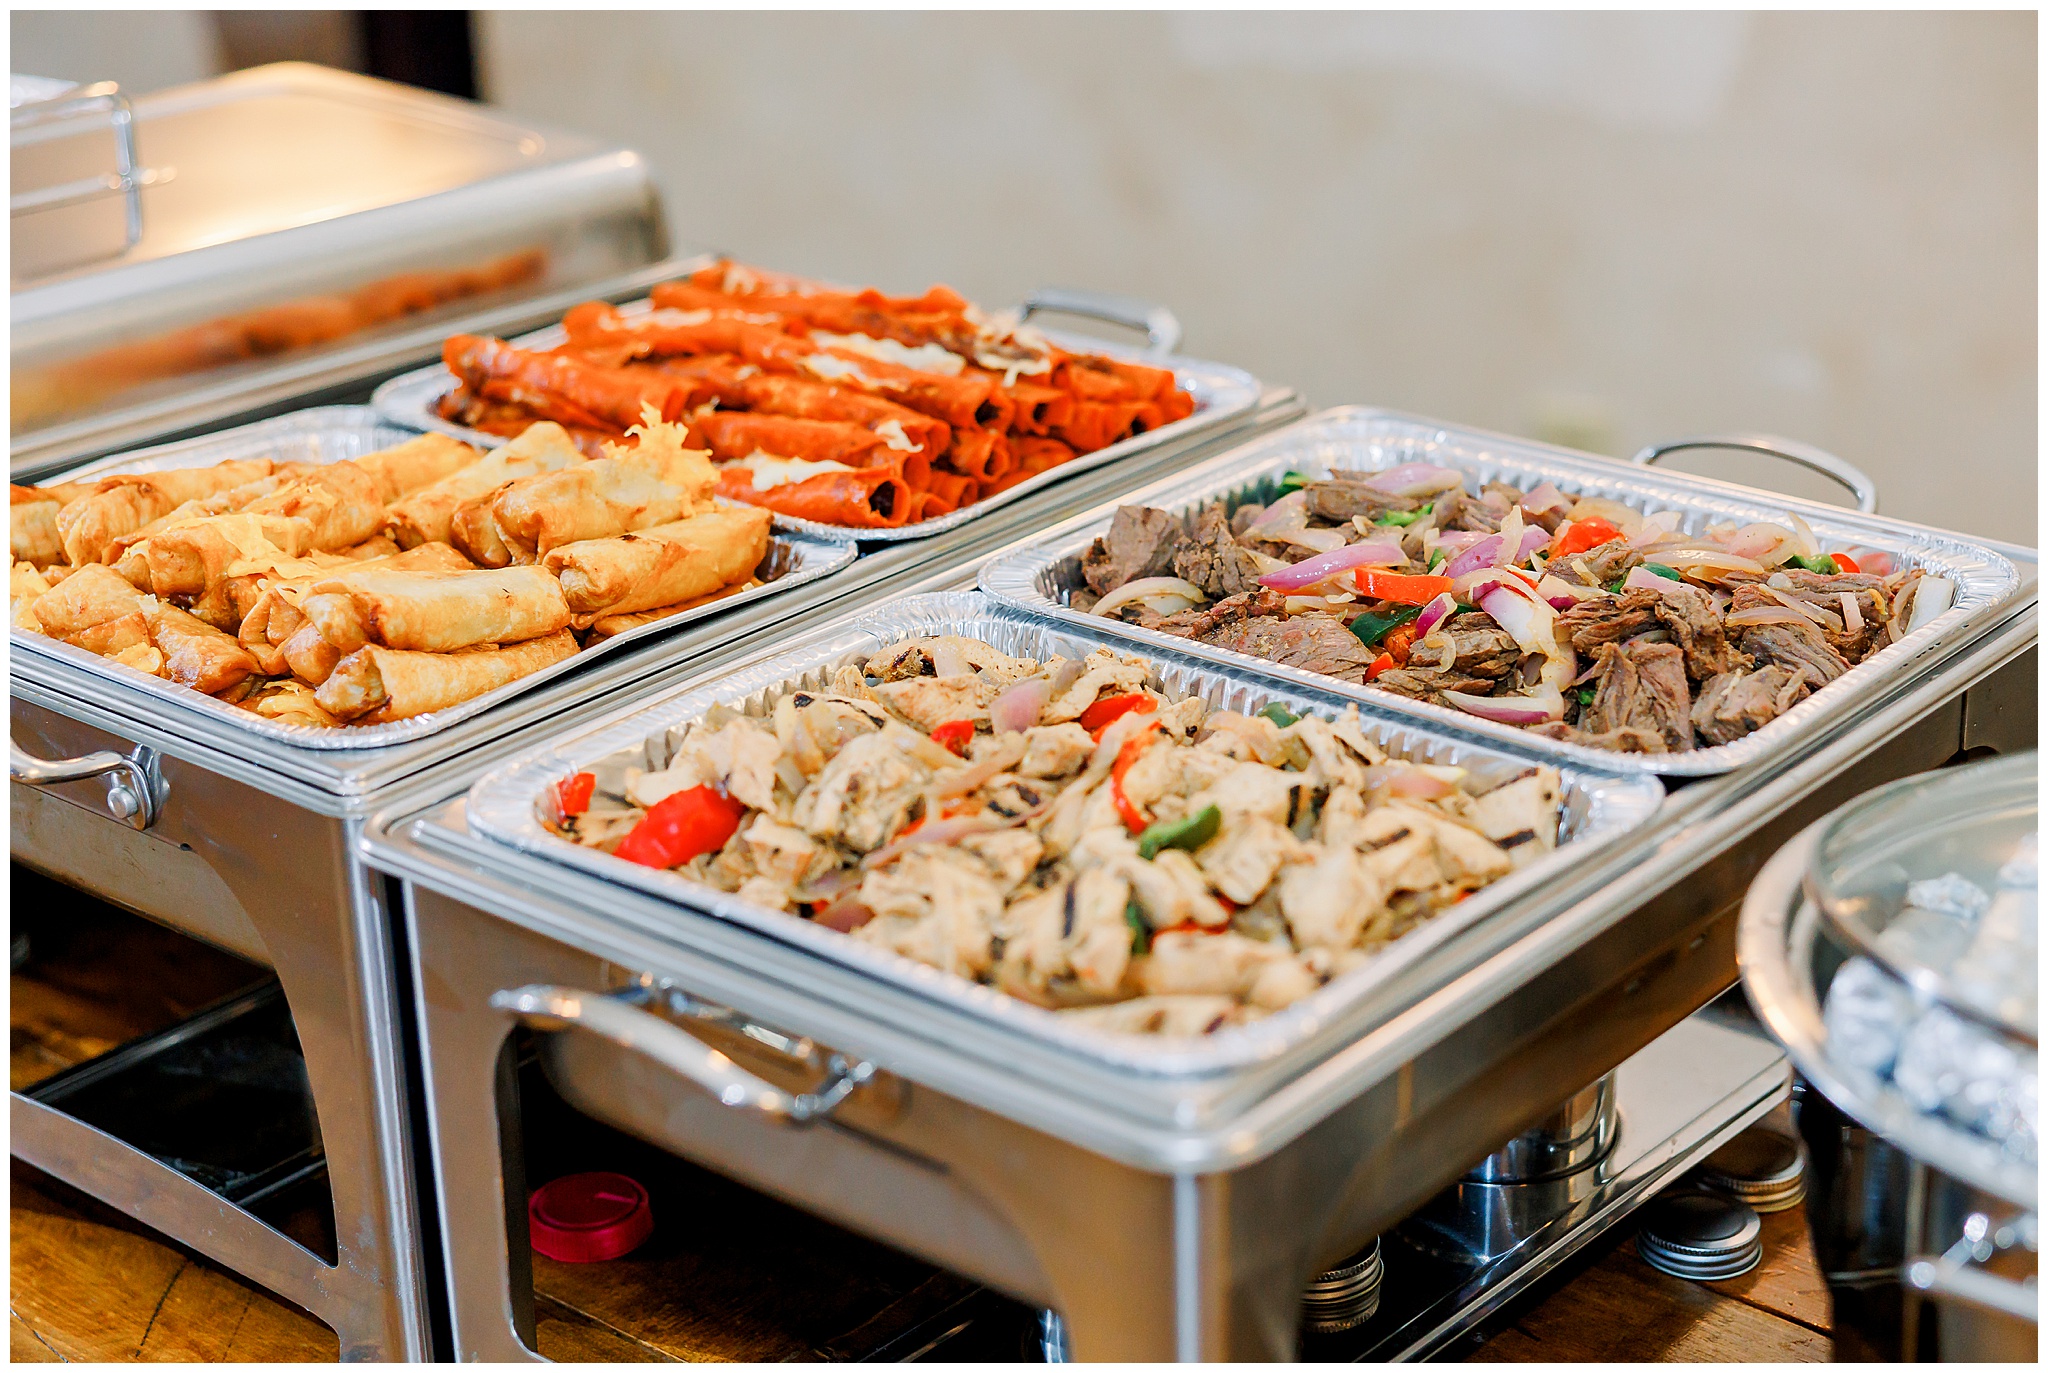 Macao's Mexican Food Catering